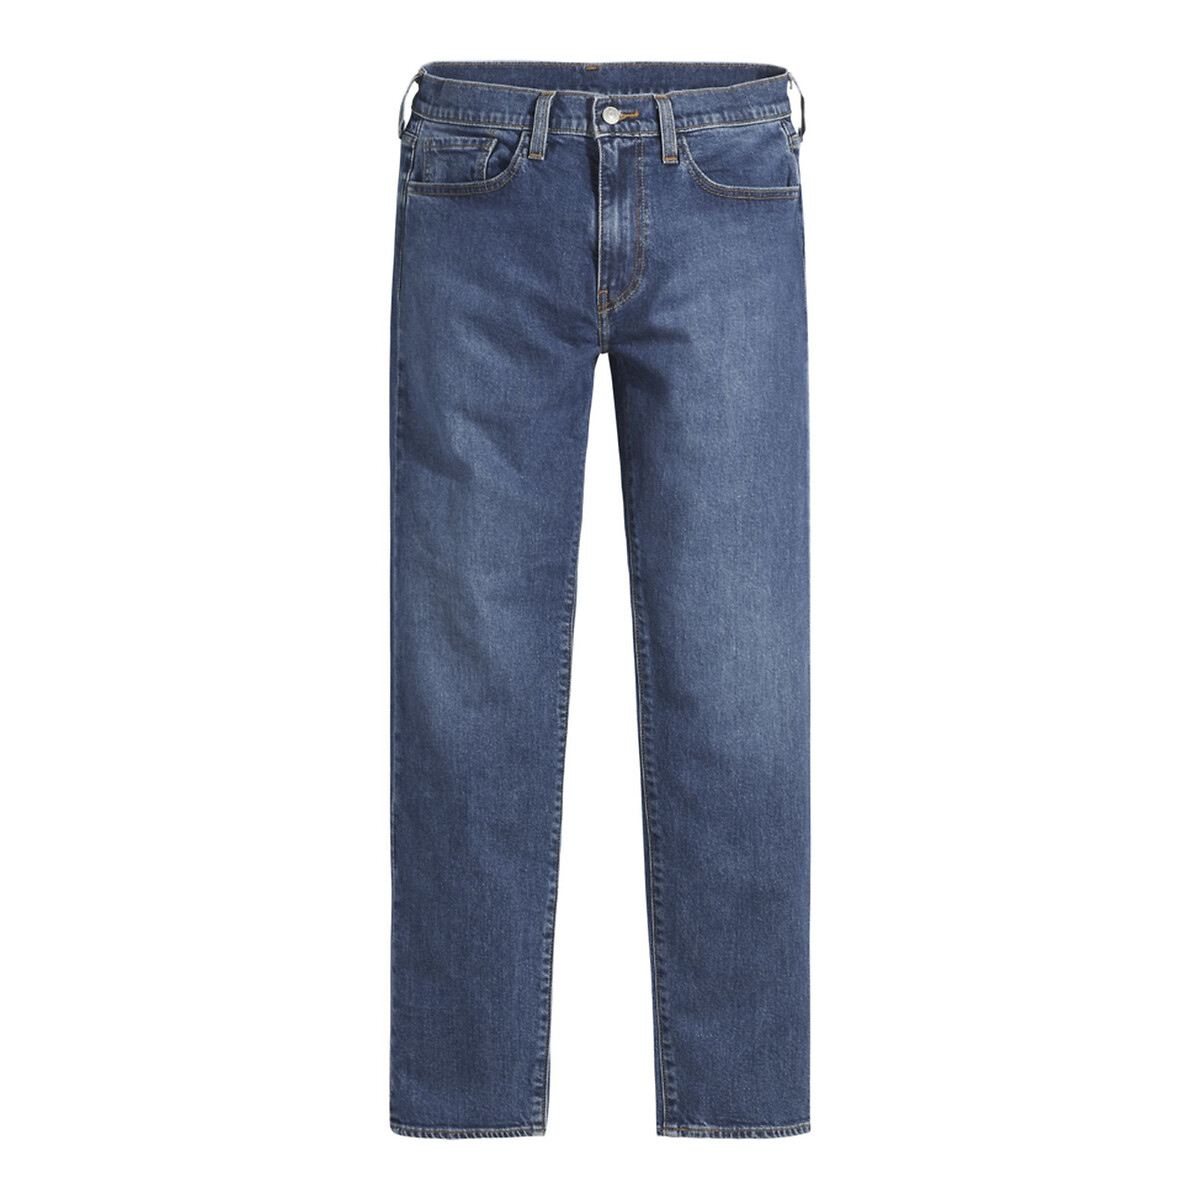 512 Tapered Jeans in Slim Fit and Mid Rise